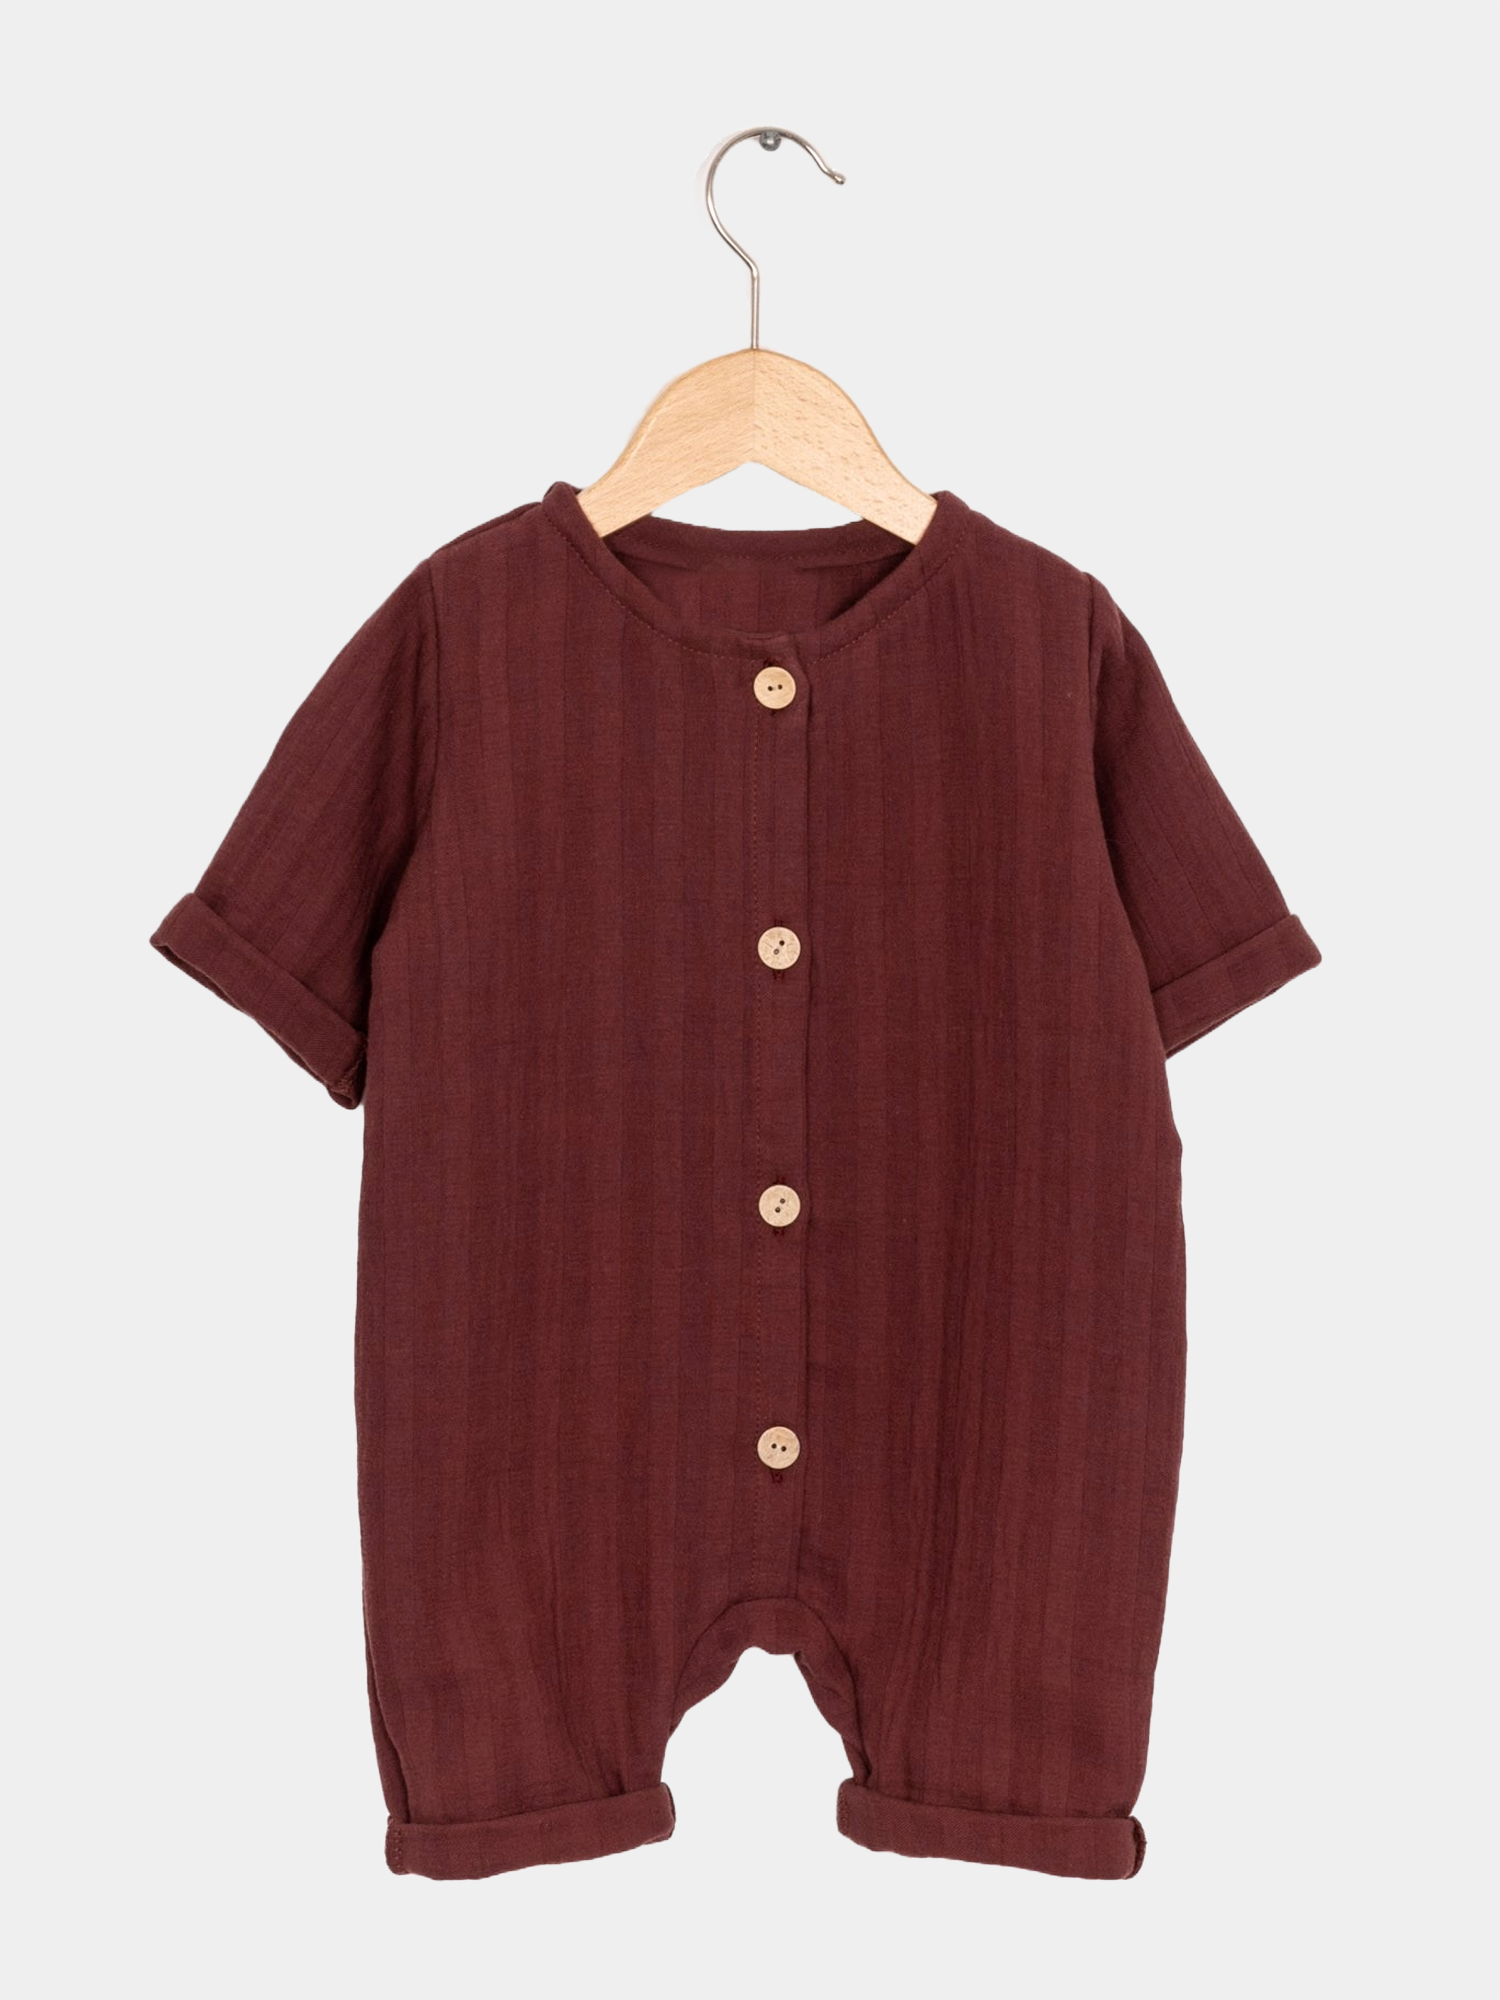 Mini overall muslin made from 100% organic cotton - Burgundy